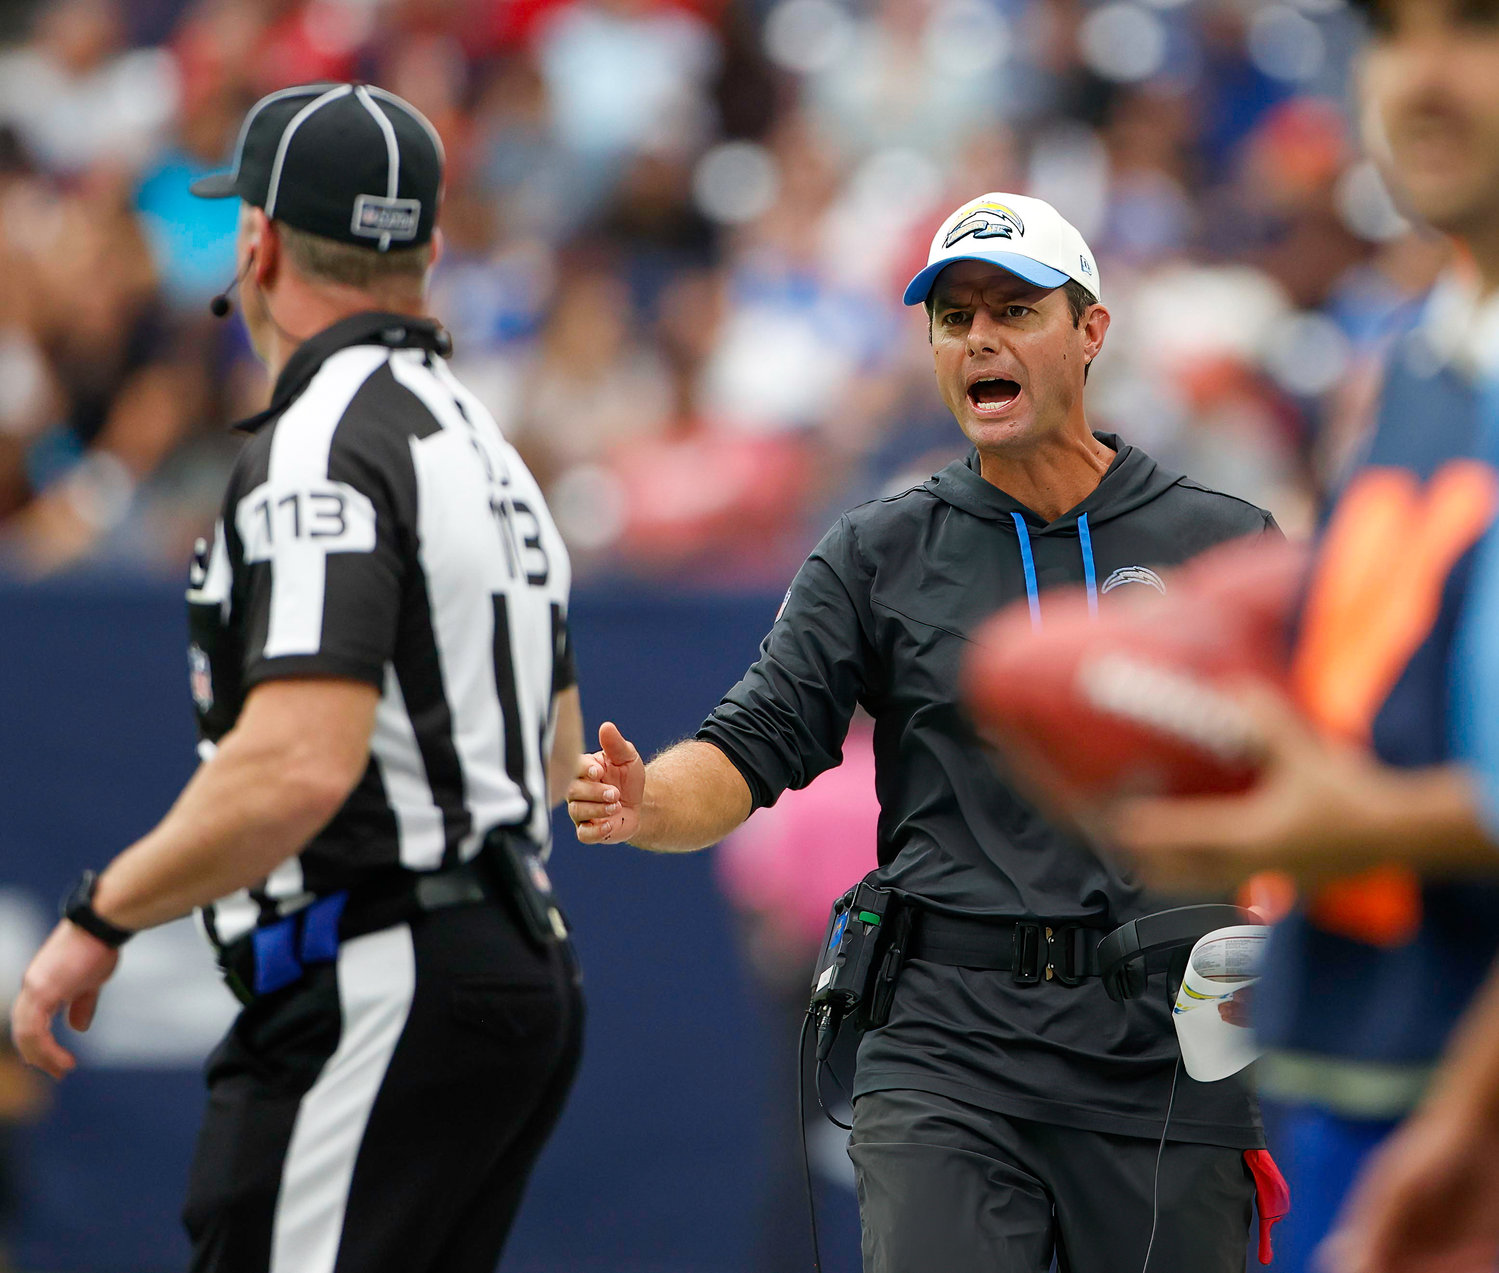 Chargers head coach Brandon Staley reacts to a no-call during an NFL game between the Texans and the Chargers on Oct. 2, 2022 in Houston. The Chargers won 34-24.